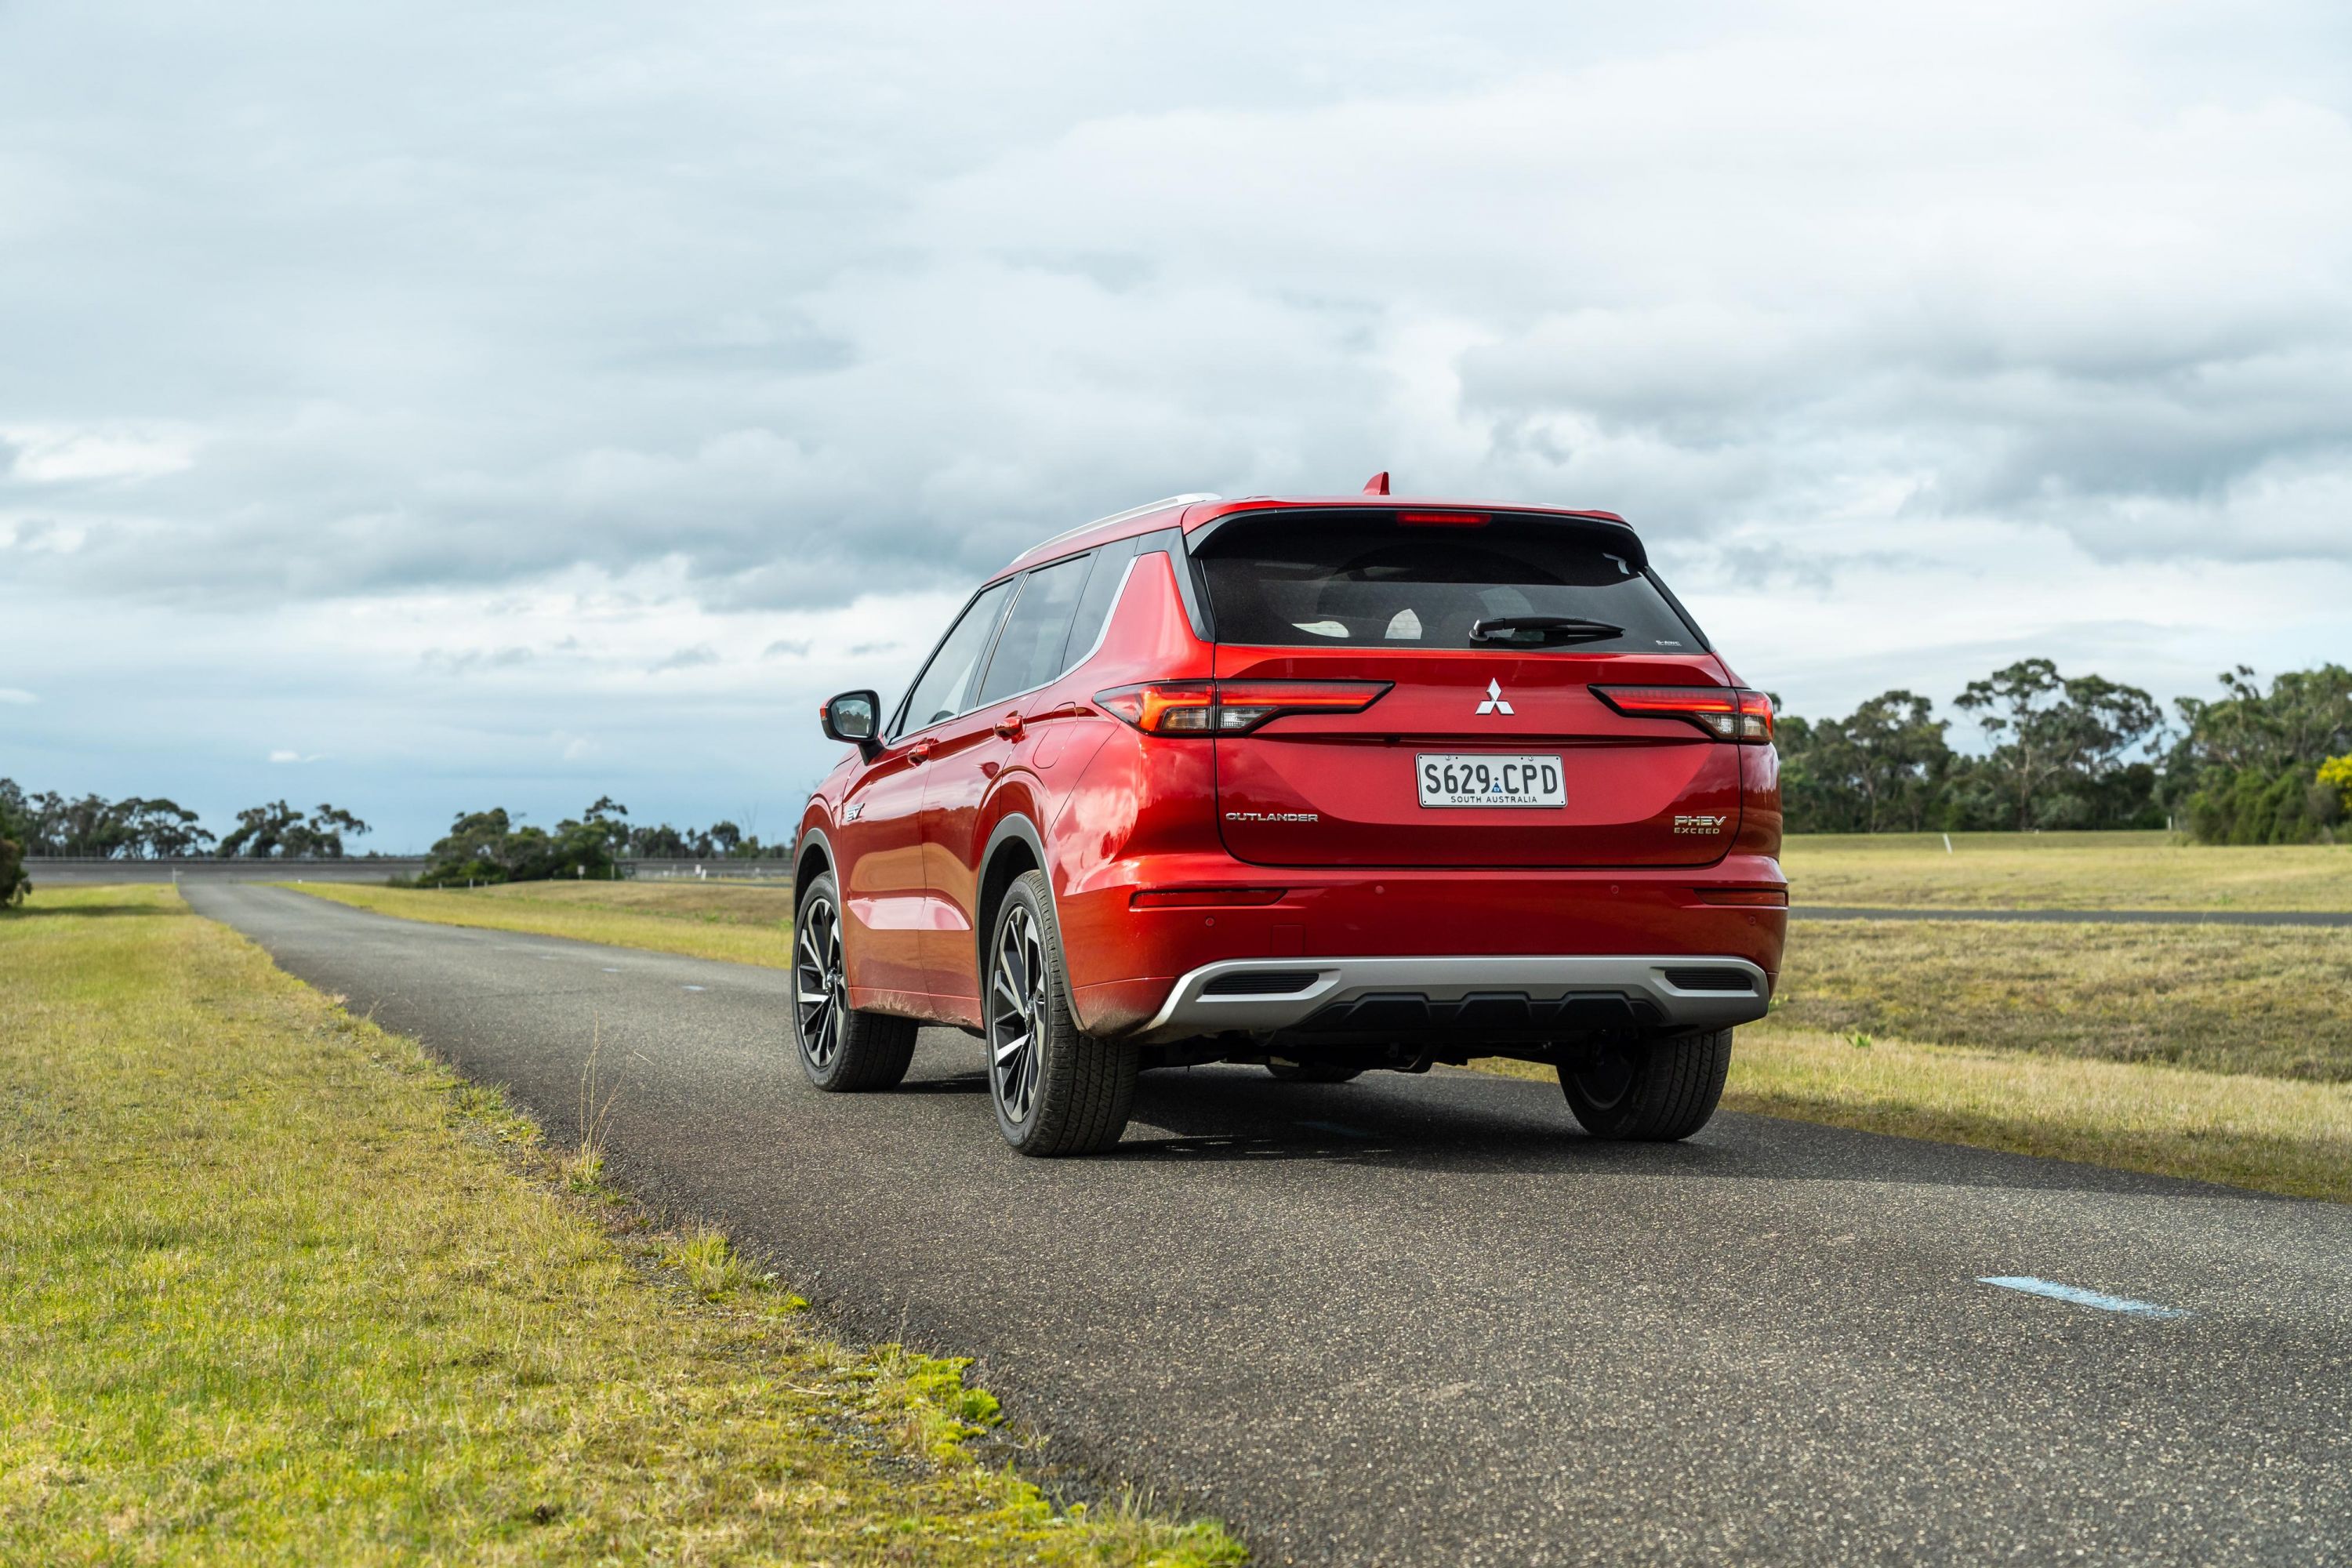 Mitsubishi Outlander PHEV 2019 review: This isn't the hybrid SUV you've  been waiting for